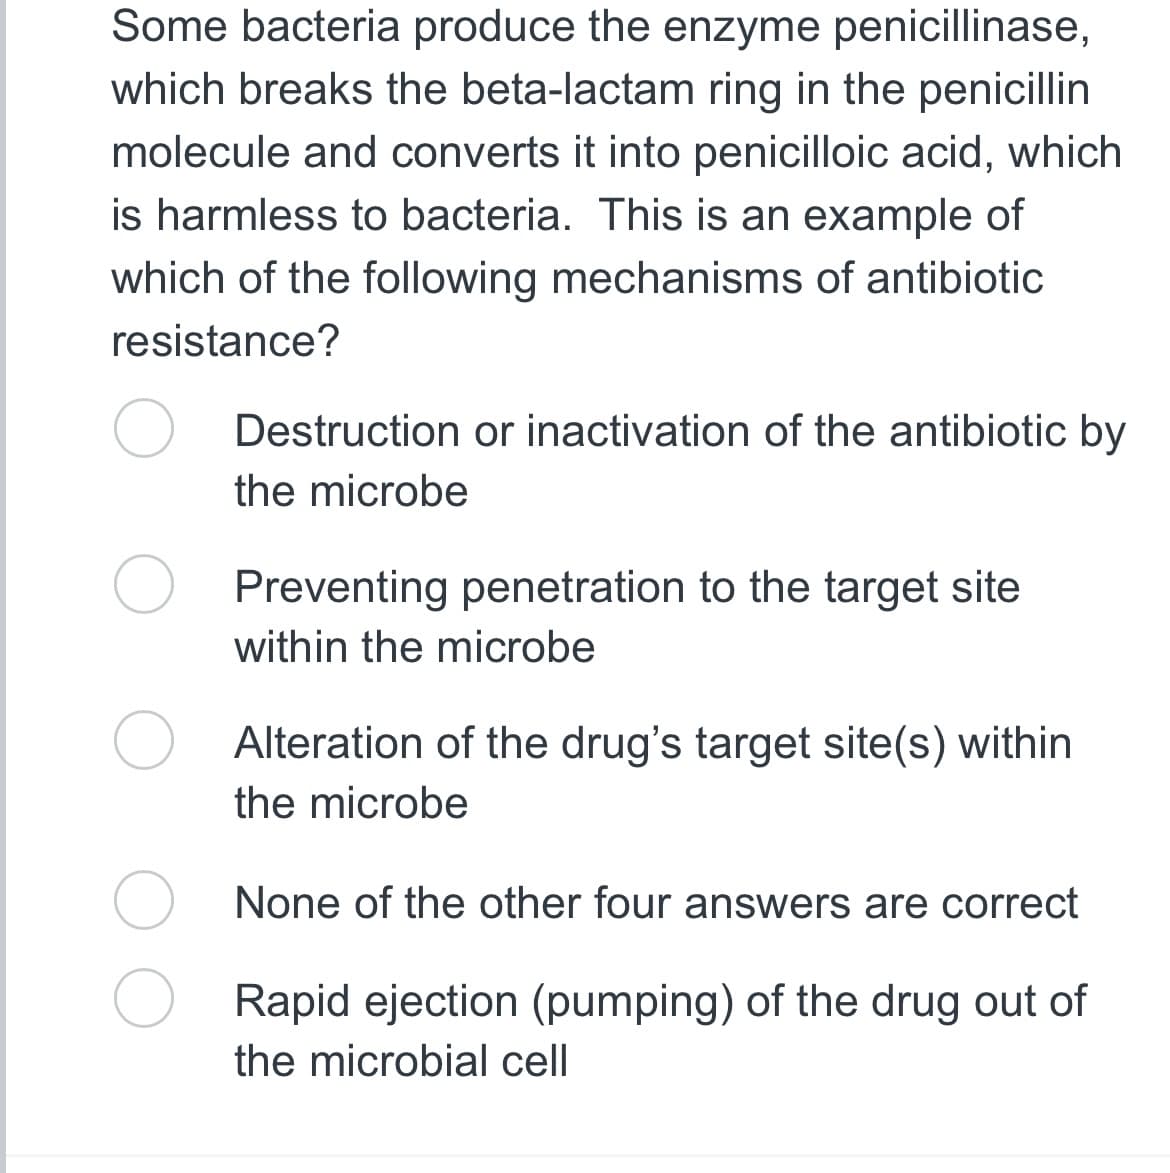 Some bacteria produce the enzyme penicillinase,
which breaks the beta-lactam ring in the penicillin
molecule and converts it into penicilloic acid, which
is harmless to bacteria. This is an example of
which of the following mechanisms of antibiotic
resistance?
Destruction or inactivation of the antibiotic by
the microbe
Preventing penetration to the target site
within the microbe
Alteration of the drug's target site(s) within
the microbe
None of the other four answers are correct
Rapid ejection (pumping) of the drug out of
the microbial cell